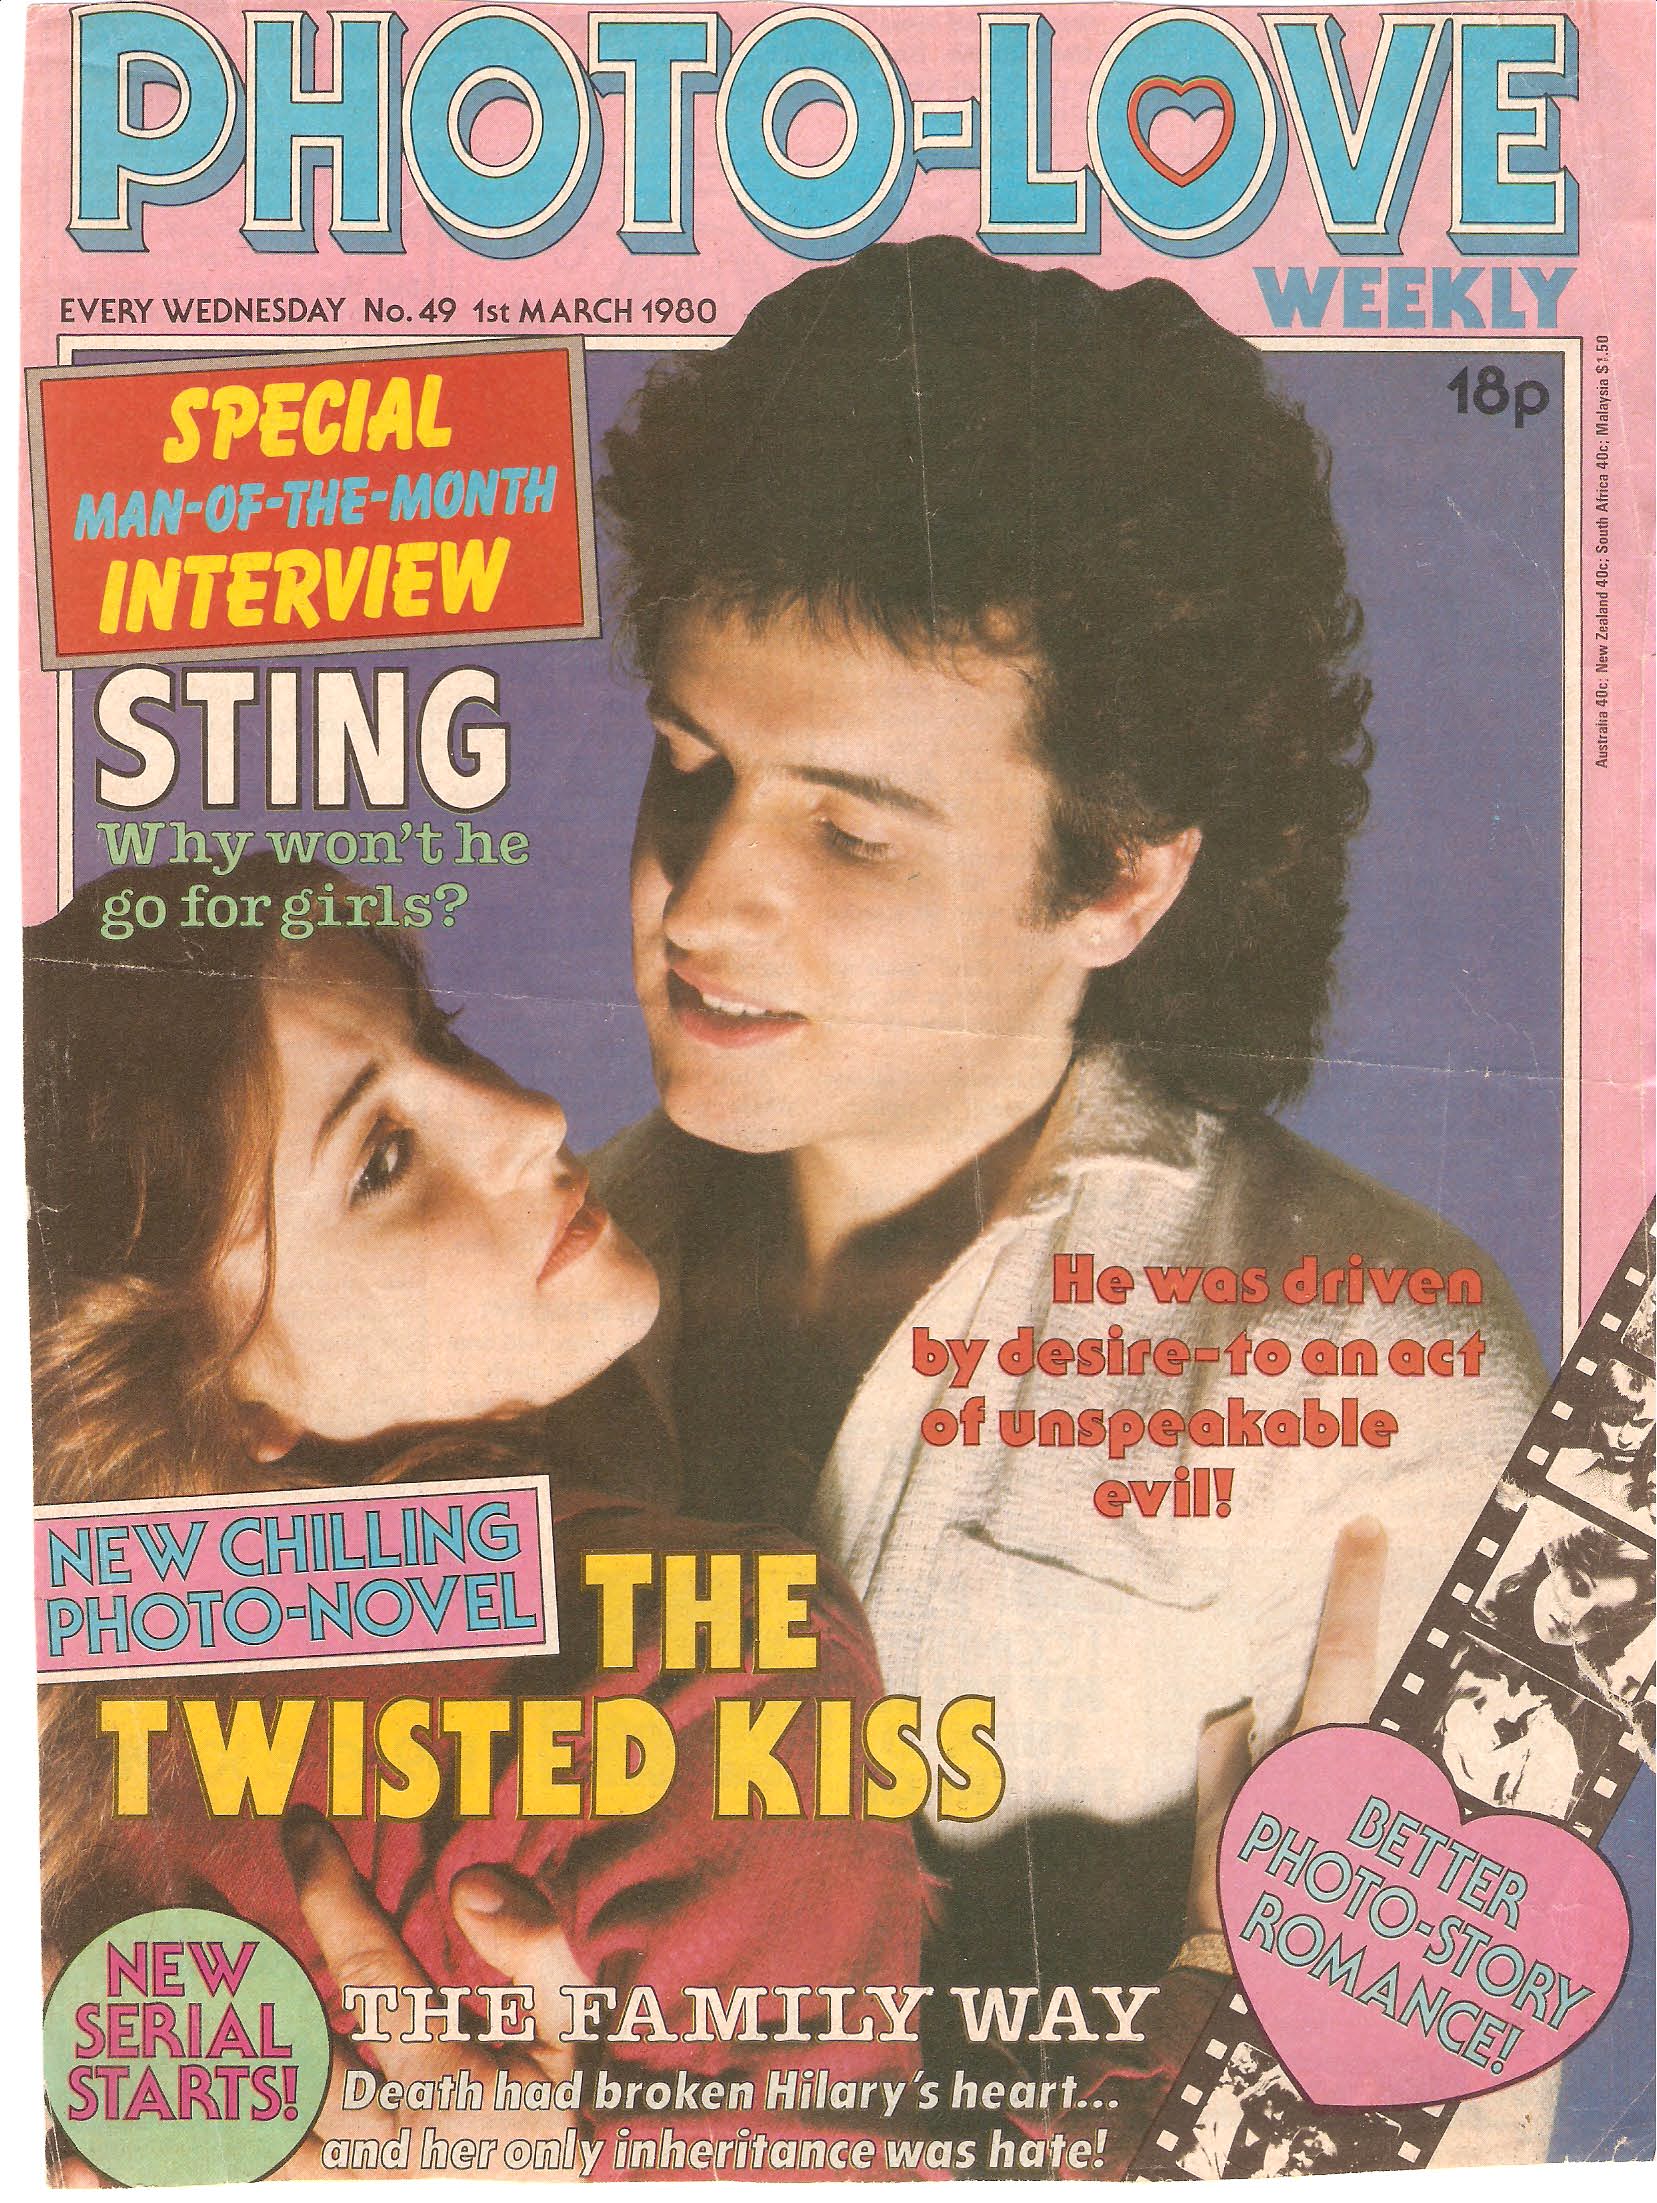 David on Front Cover When he was 17